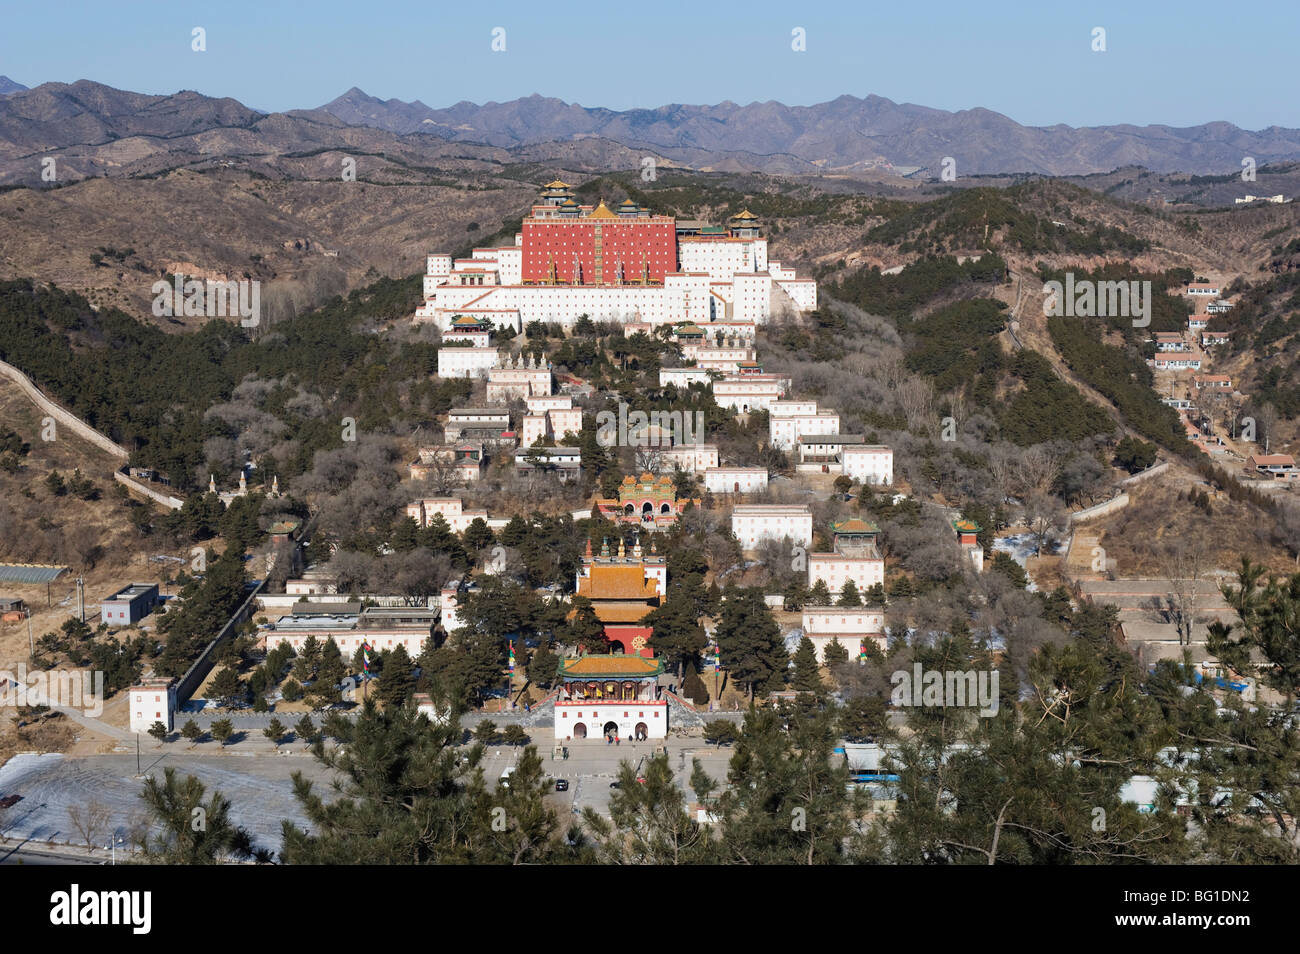 Putuo Zongcheng Tibetan outer temple dating from 1767, Chengde city, UNESCO World Heritage Site, Hebei Province, China, Asia Stock Photo